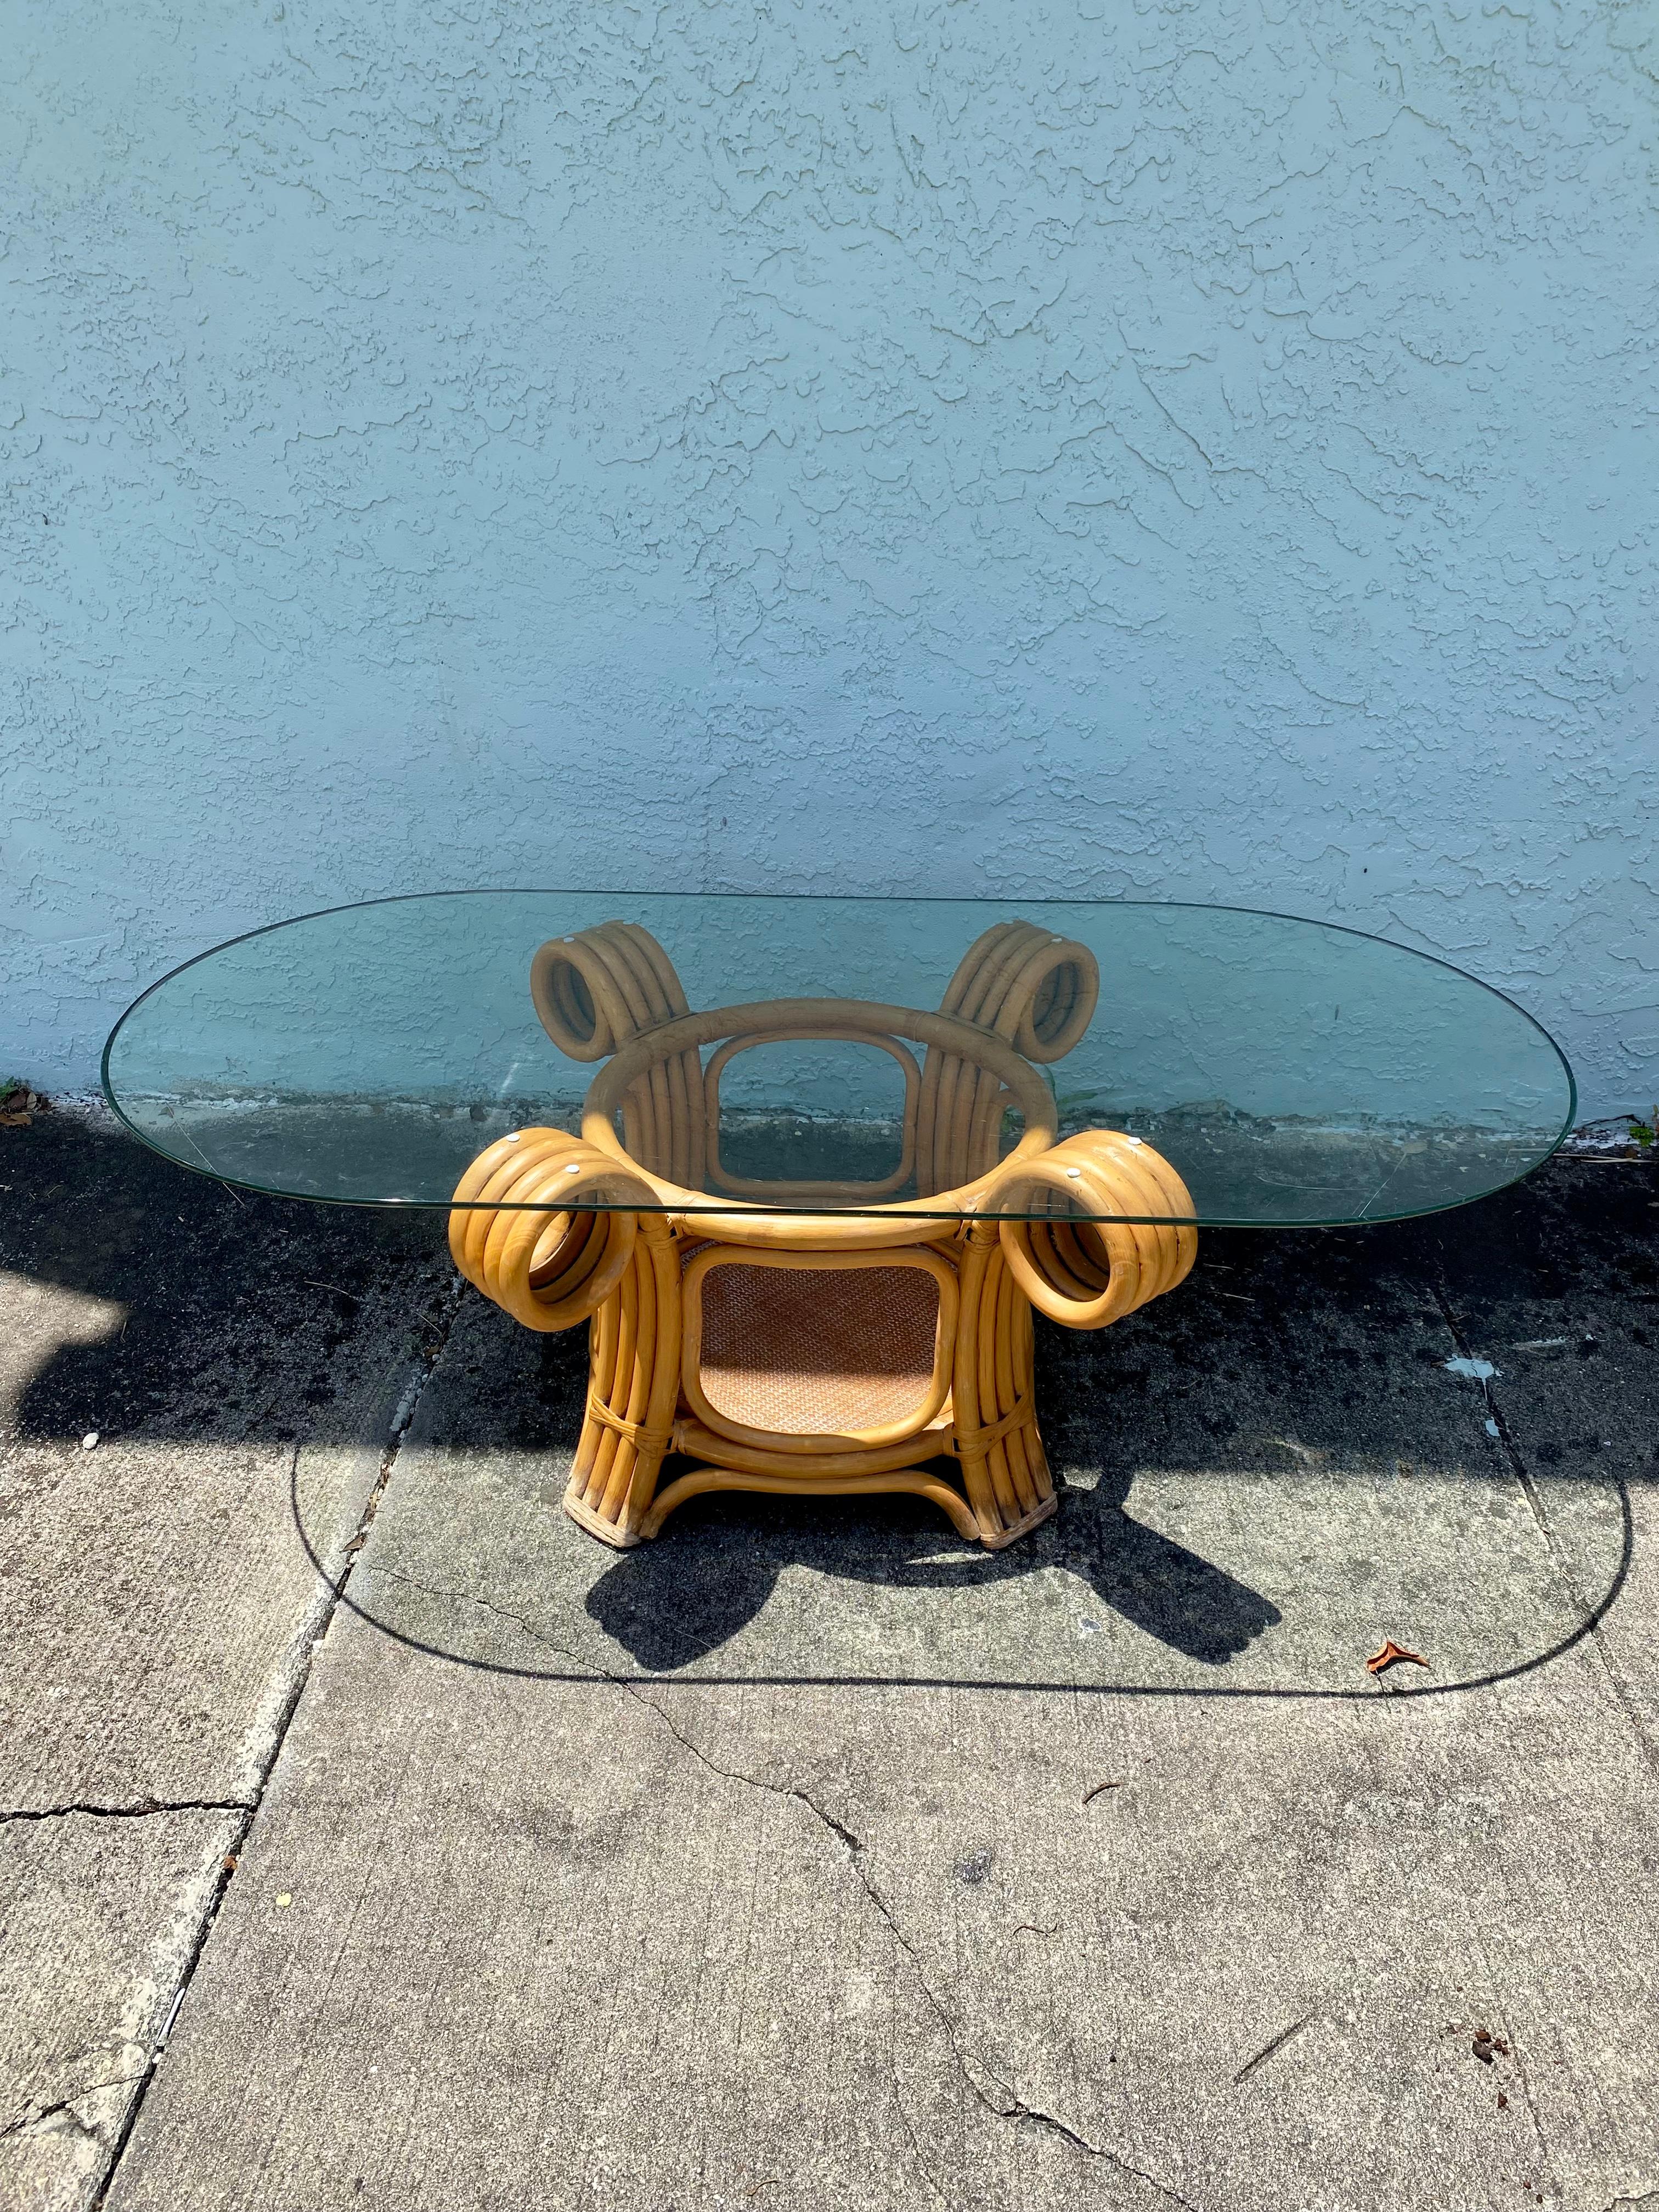 On offer on this occasion is one of the most stunning, table set you could hope to find. This is an ultra-rare opportunity to acquire what is, unequivocally, the best of the best, it being a most spectacular and beautifully-presented chairs.